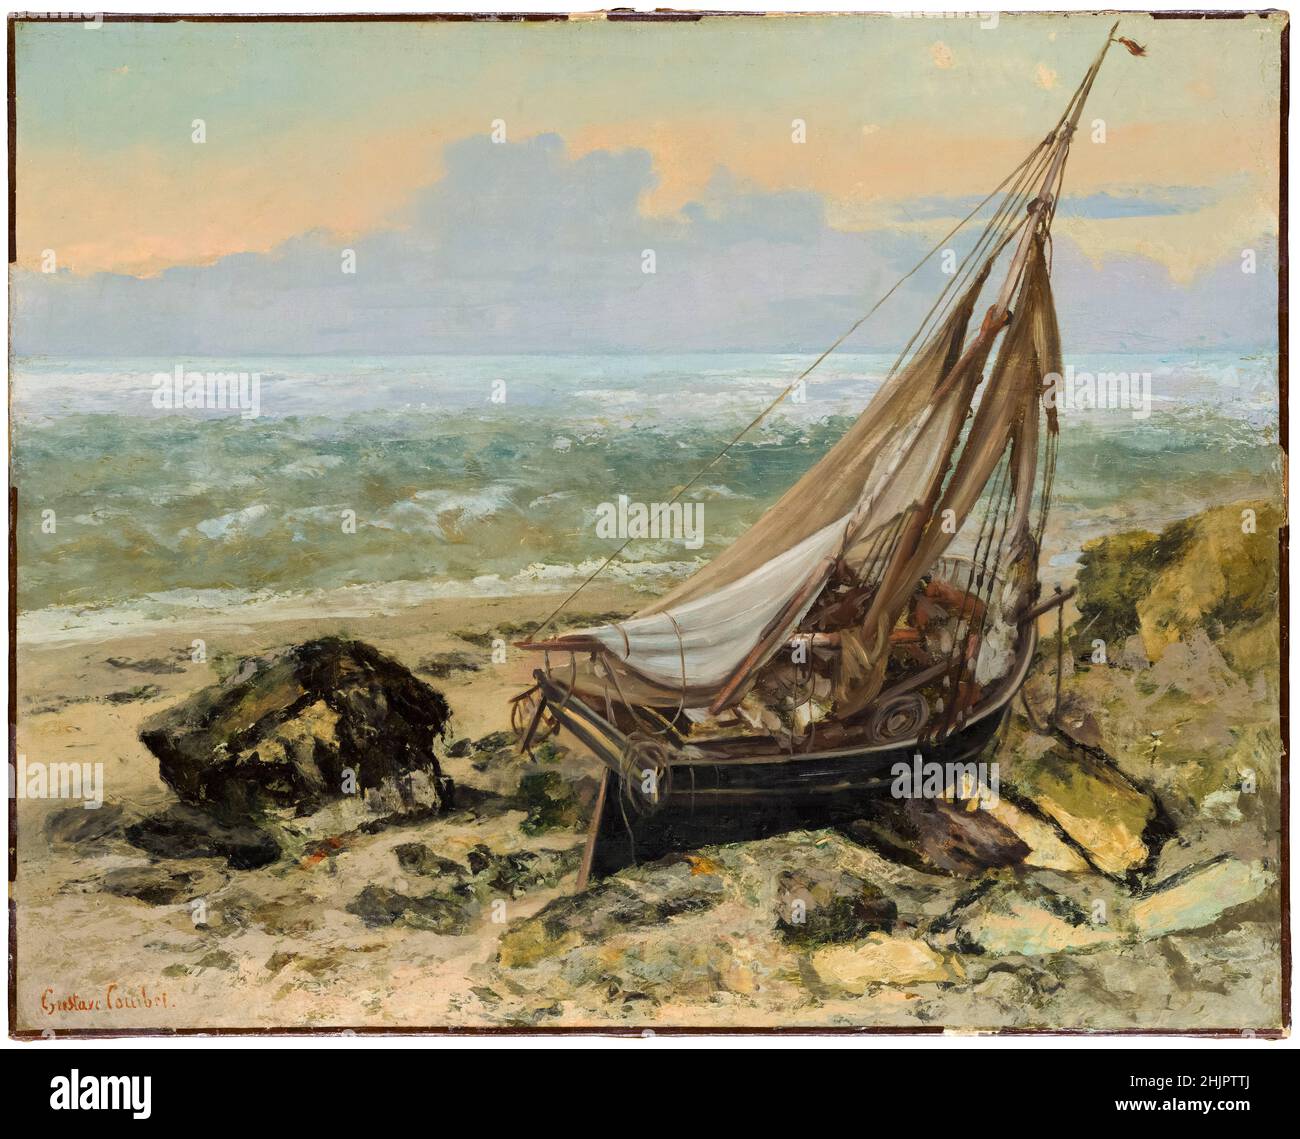 The Fishing Boat, painting by Gustave Courbet, 1865 Stock Photo